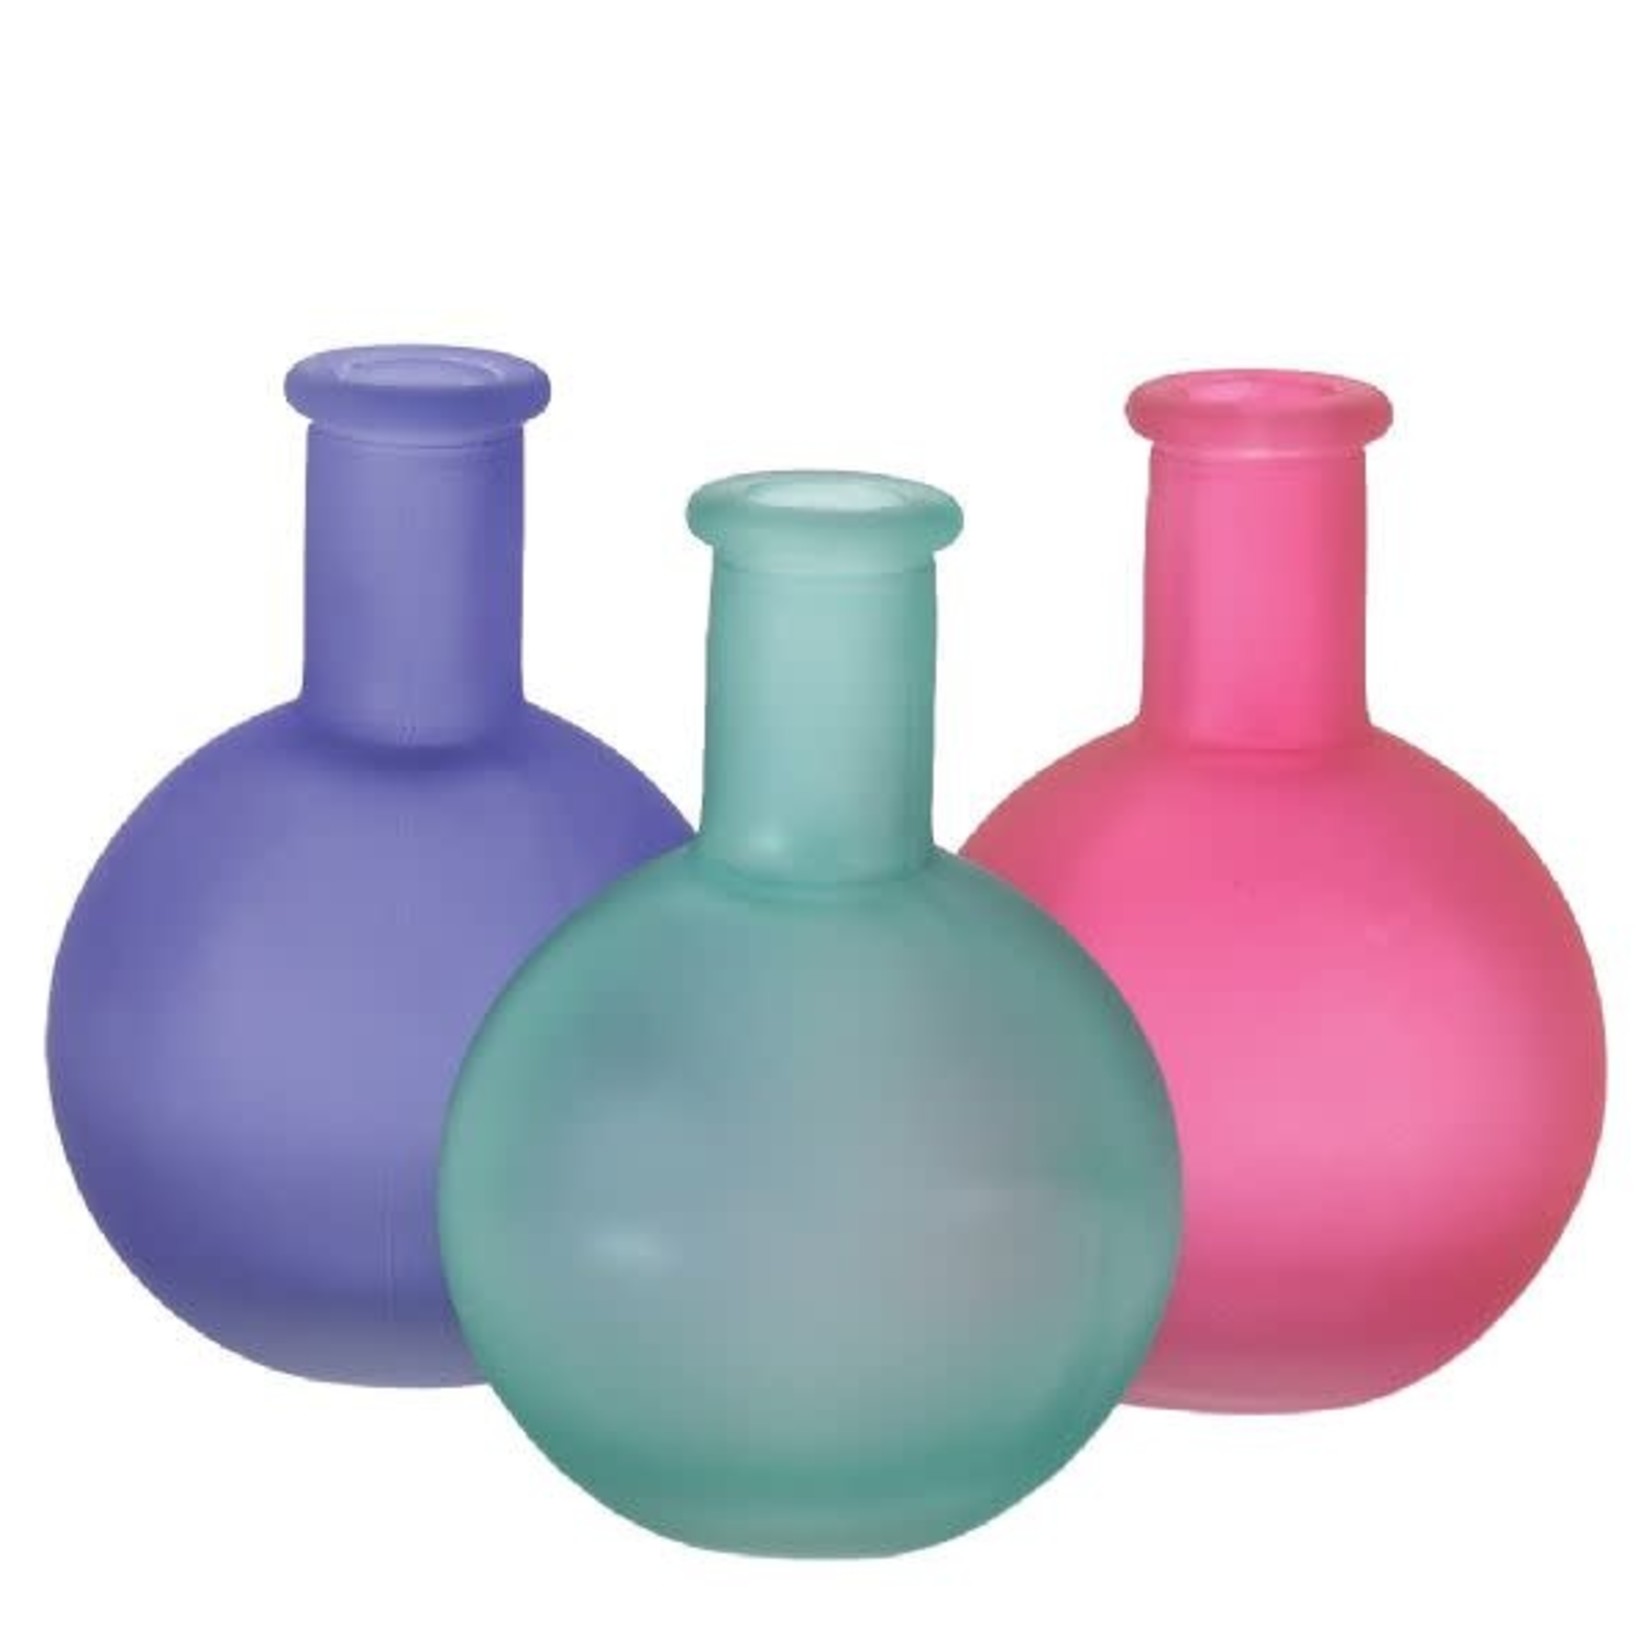 7.5" X 1.75" OPEN BUD VASE FROSTED GLASS ASSORTED COLORS PER BOX